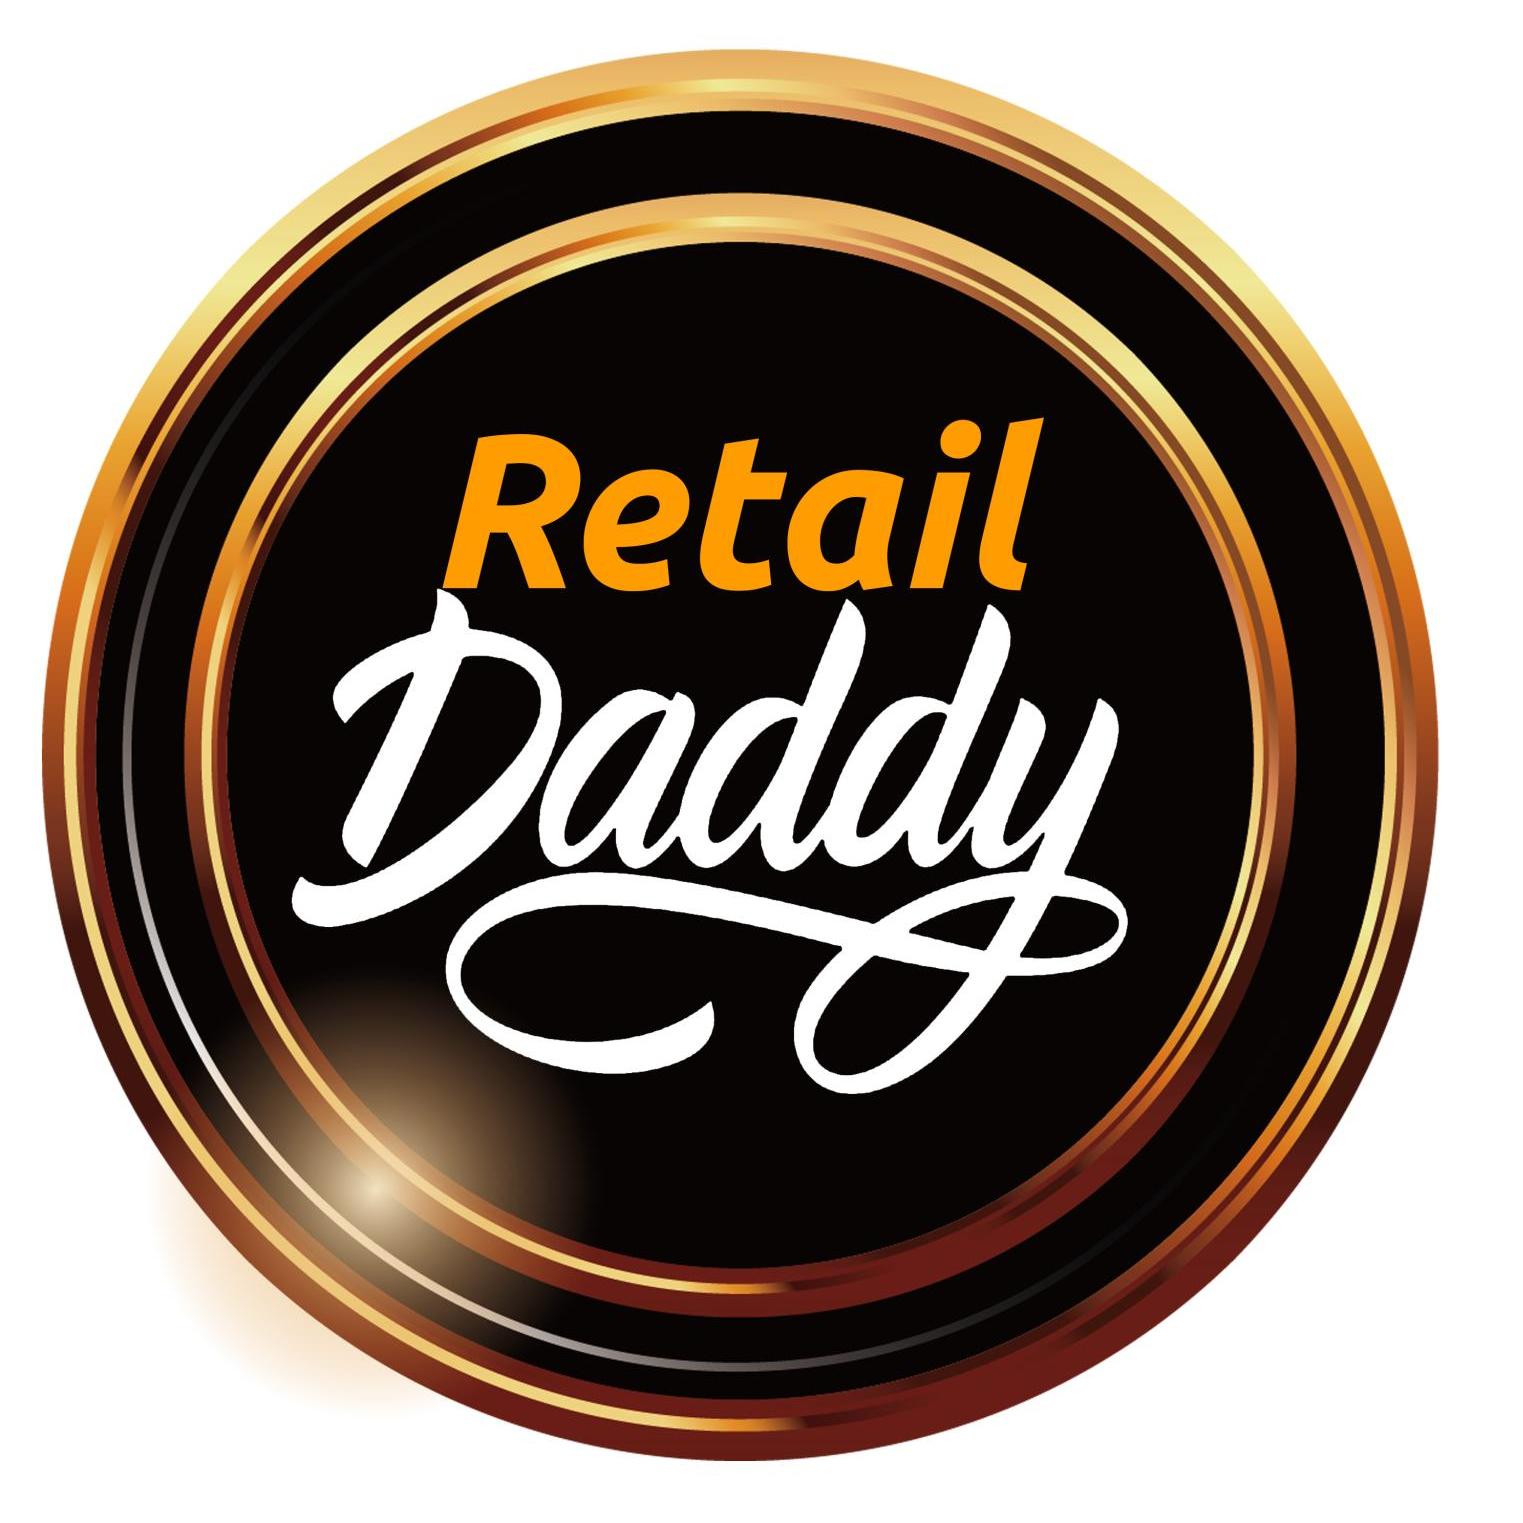 Retail Daddy